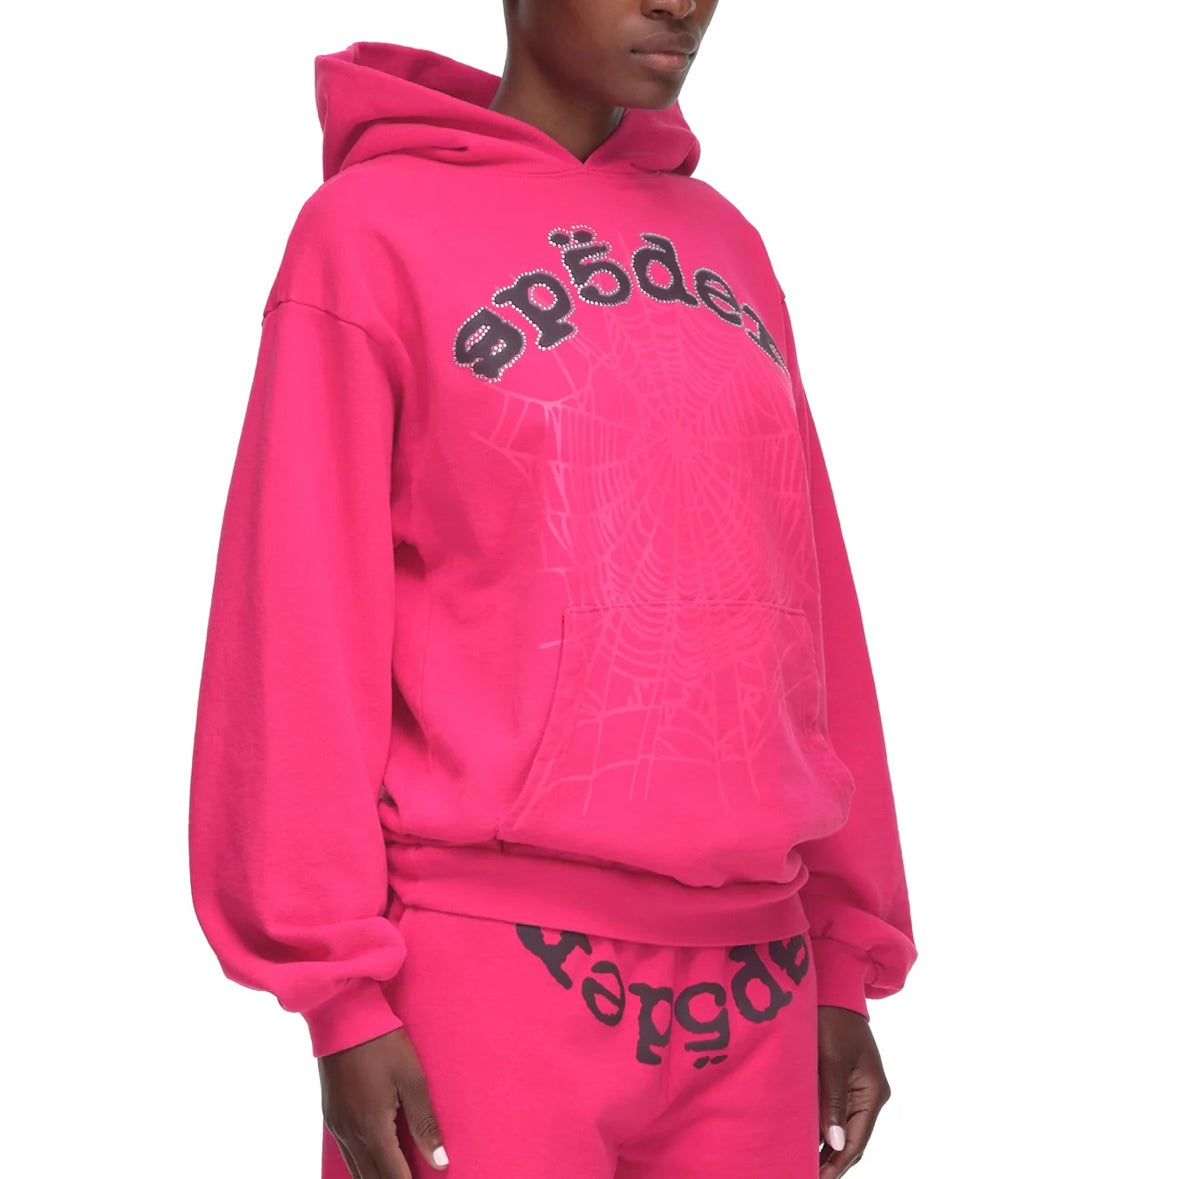 Sp5der Pink Black Rhinestone Legacy Hoodie On Body Front Right Female